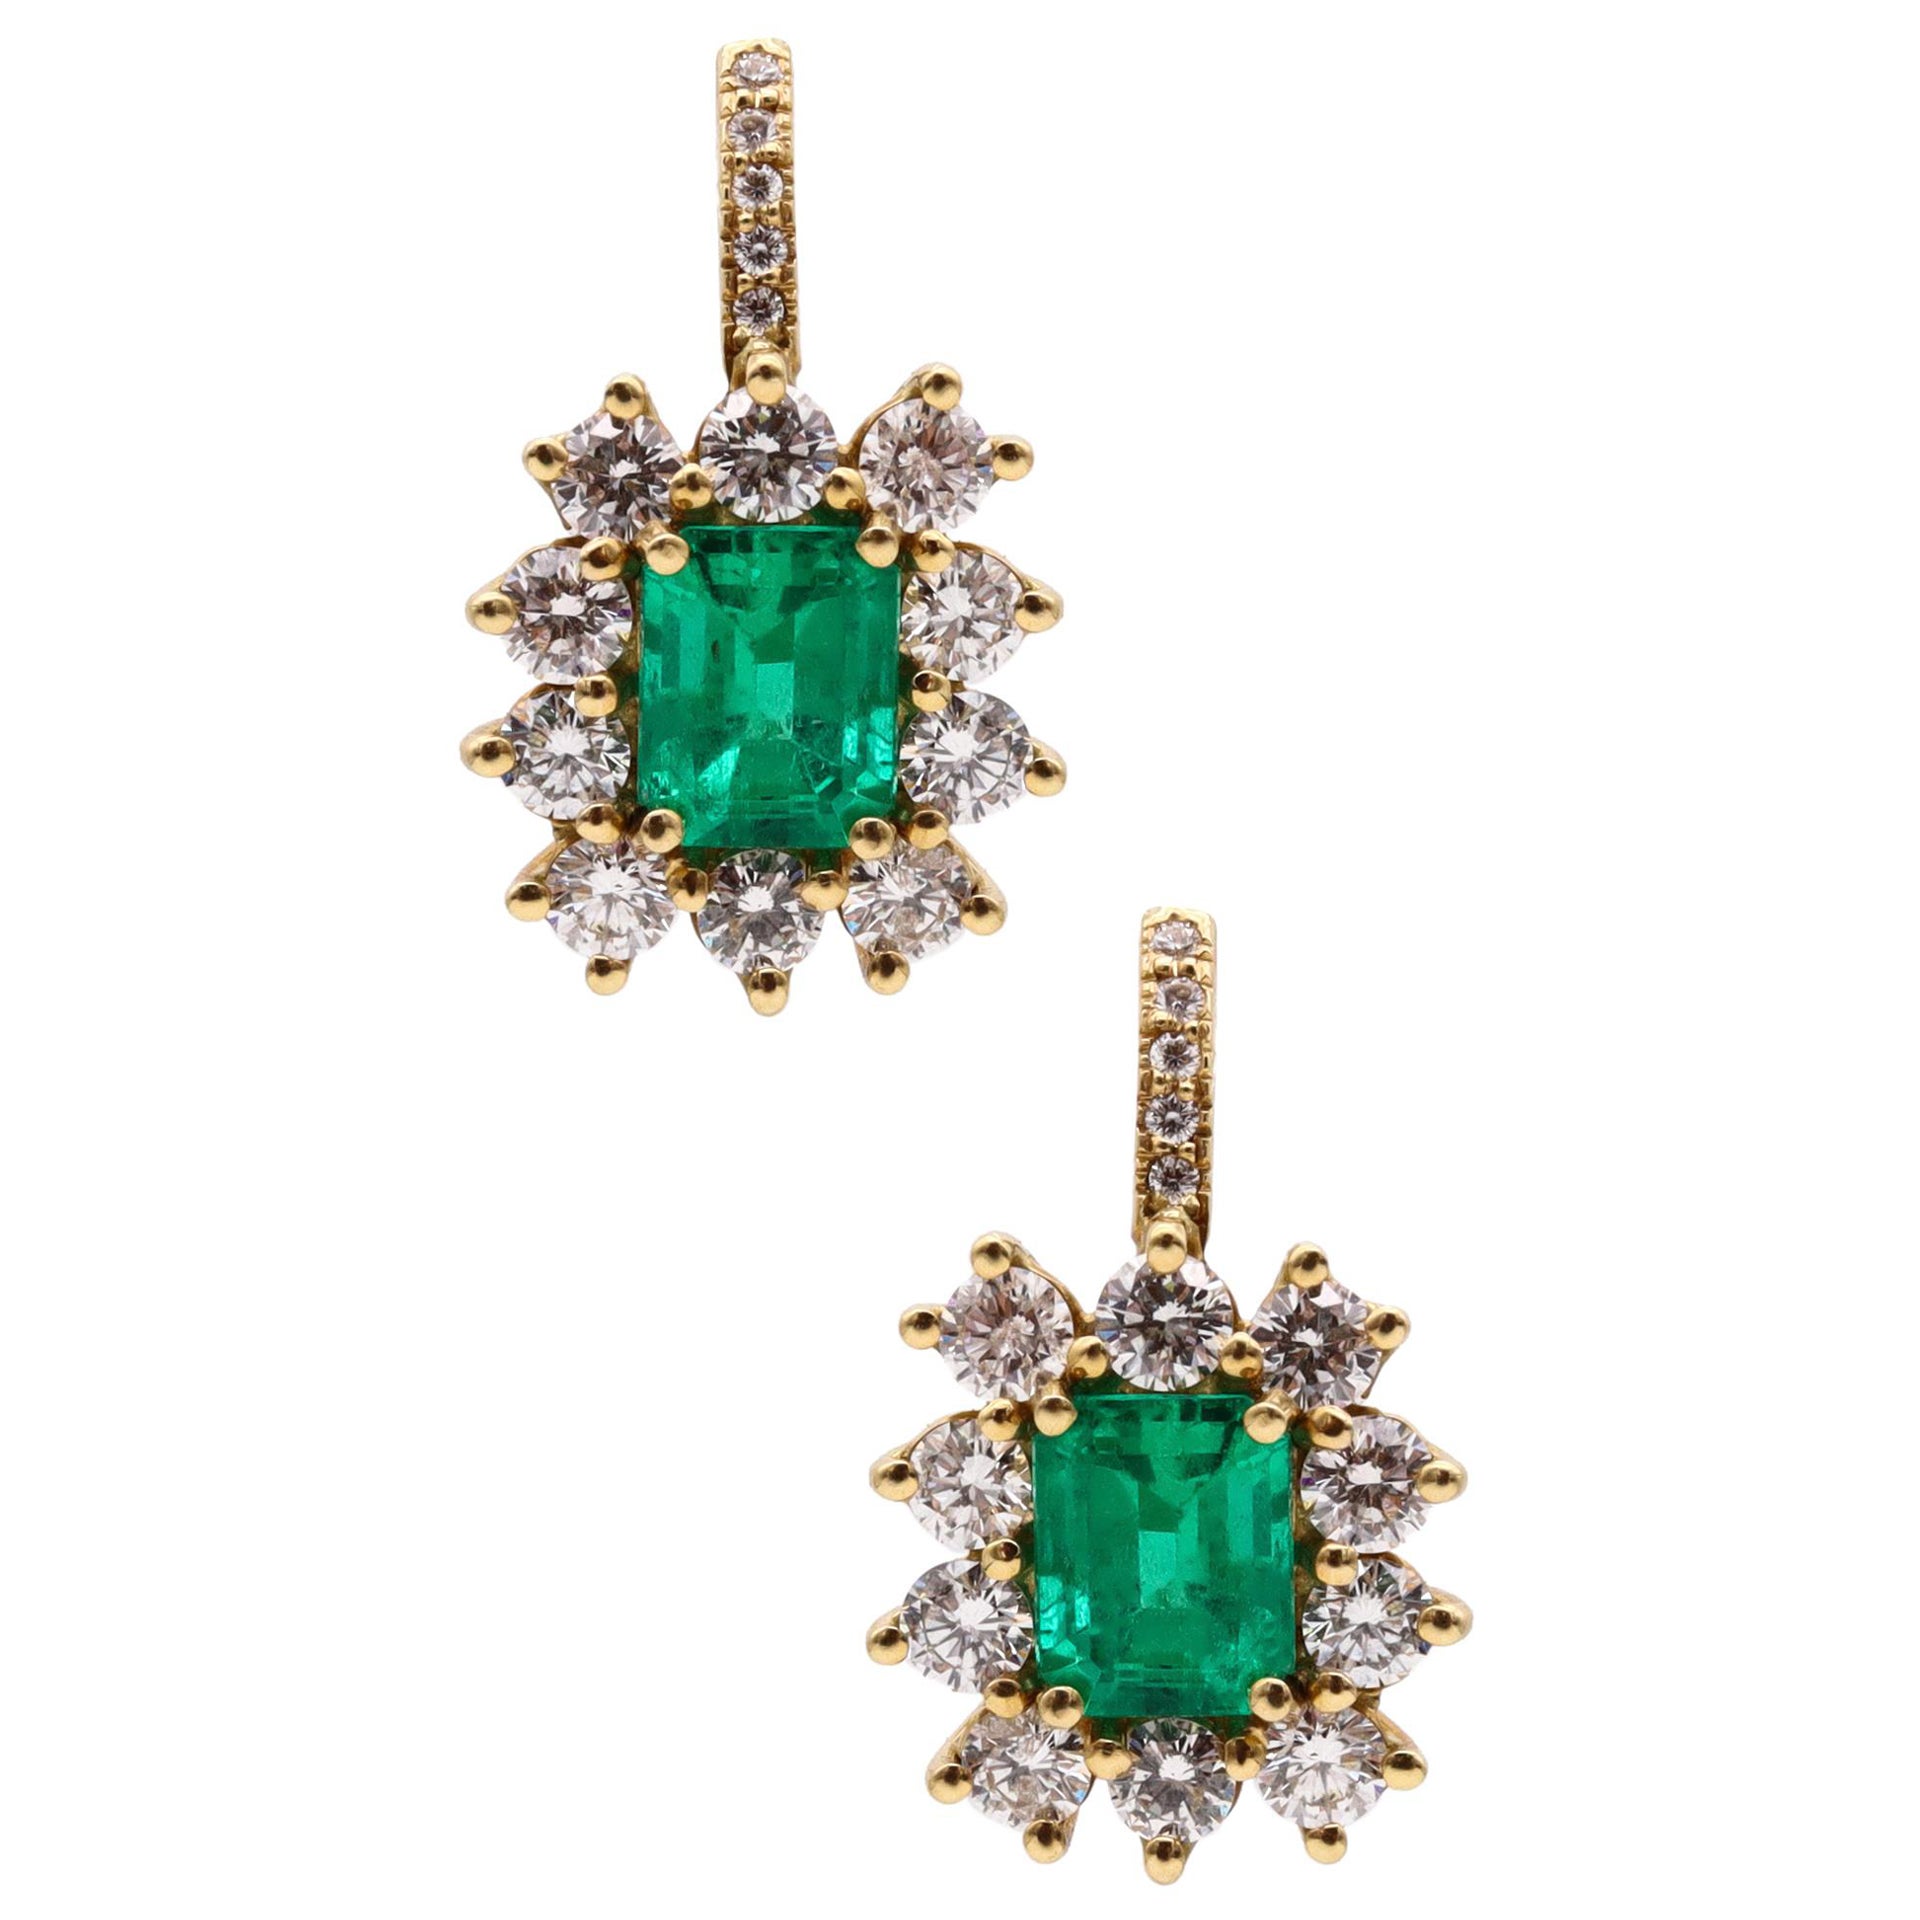 French Hook Earrings in 18kt Yellow Gold with 4.92 Ctw in Diamonds and Emeralds